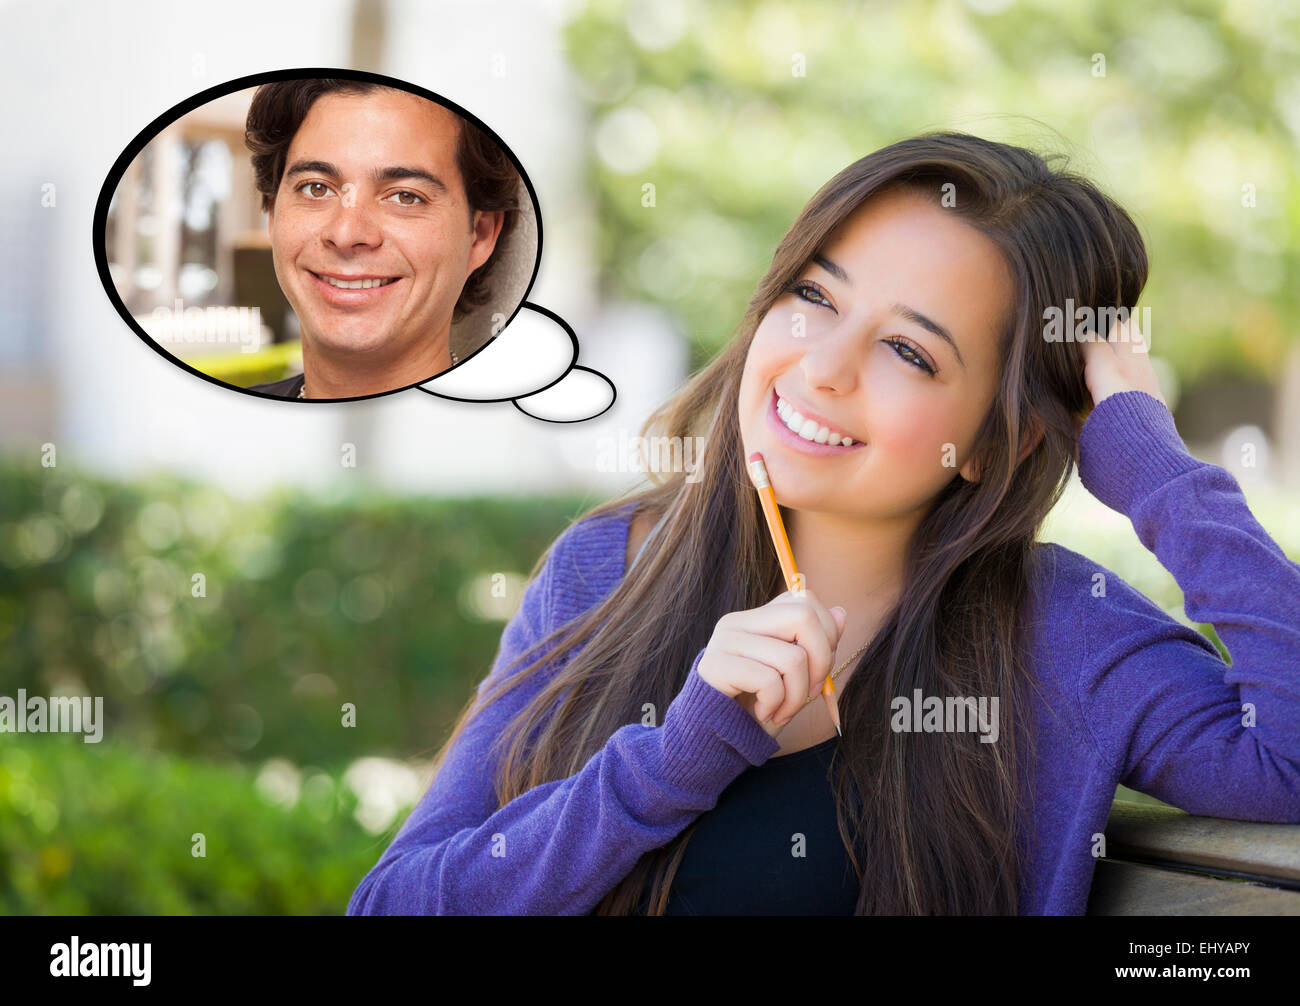 Pensive Woman with Handsome Young Man Inside Thought Bubble. Stock Photo